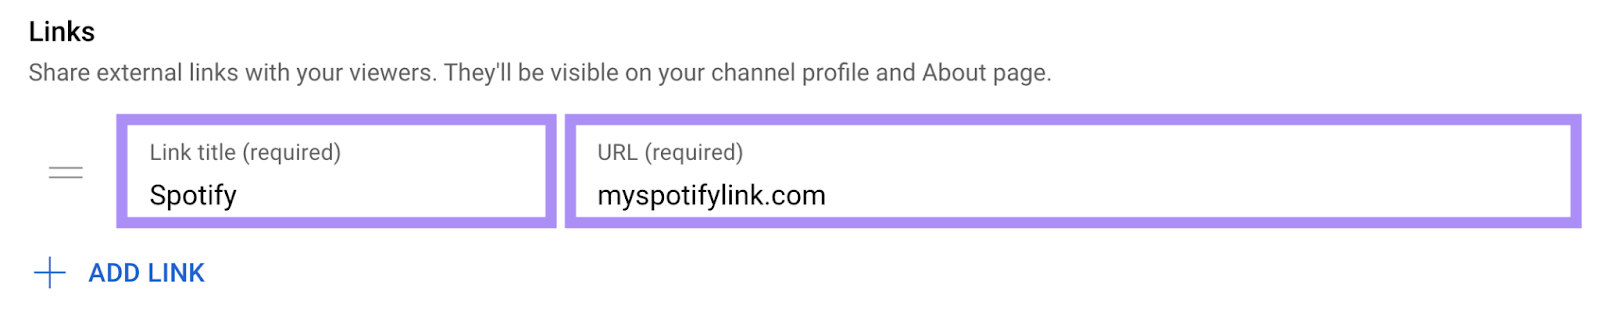 "Spotify" and "myspotifylink.com" entered under "Links" section in “YouTube Studio